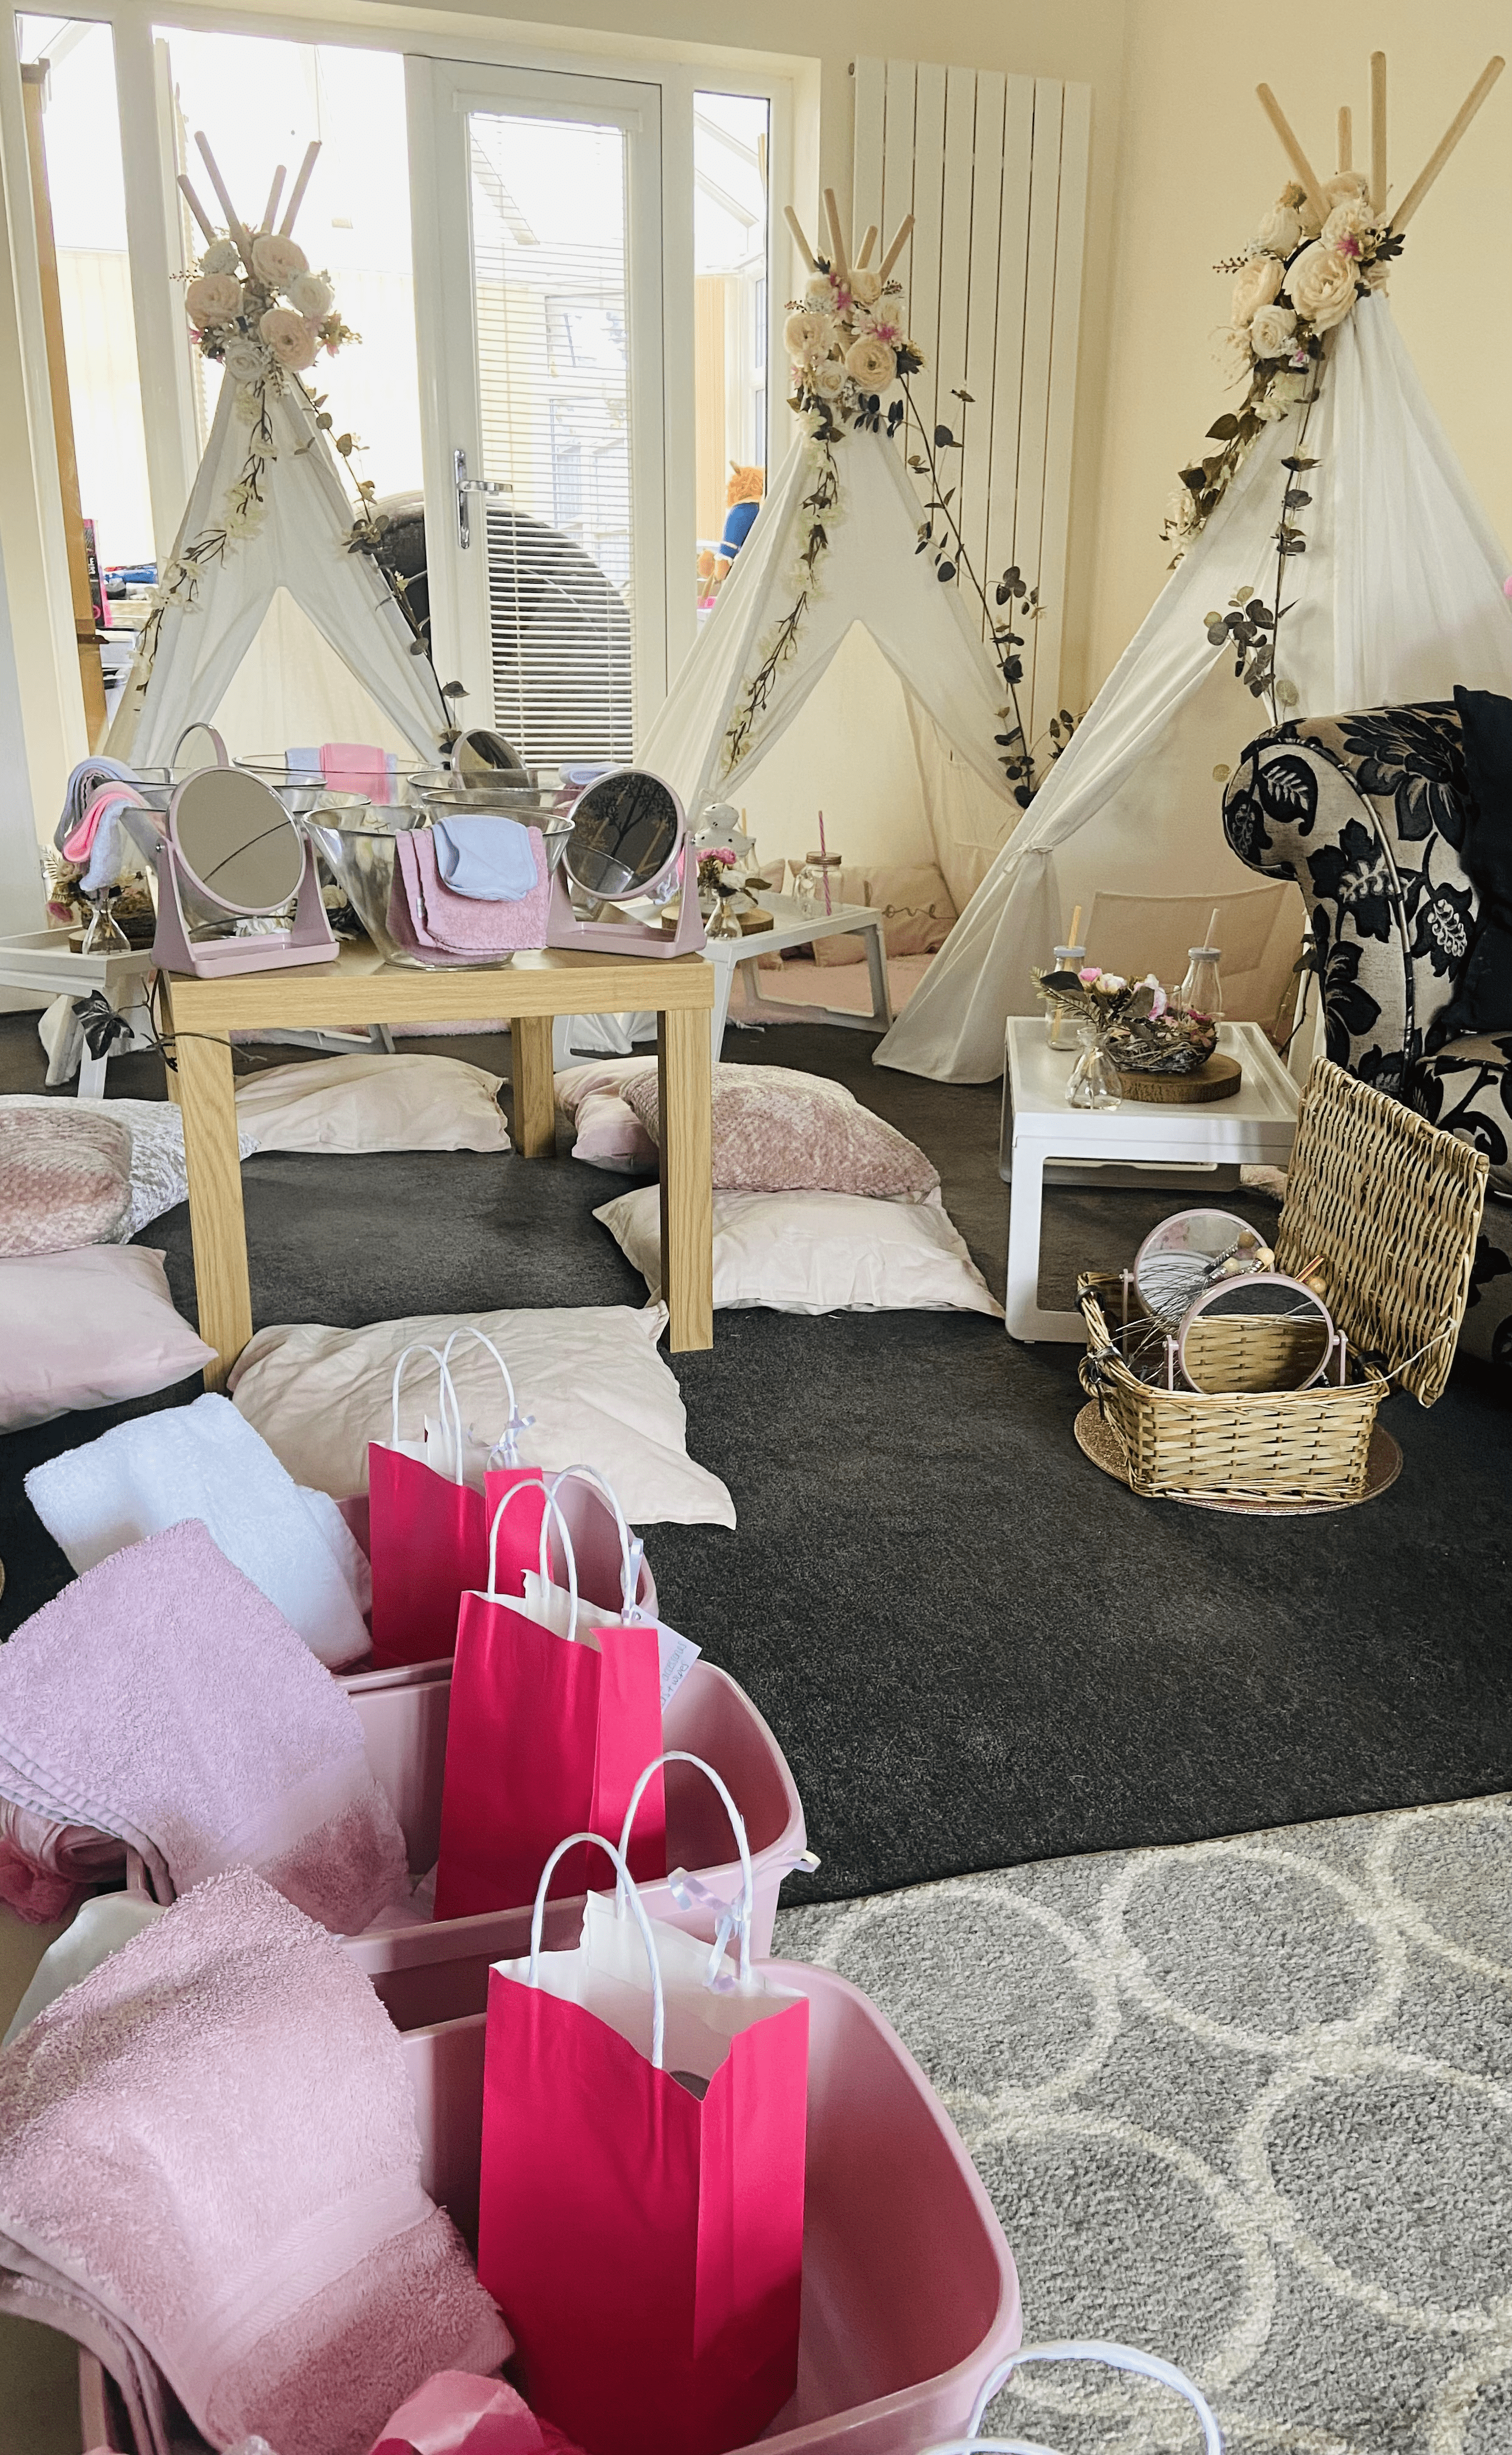 Teepees Treats and Events- Sleepover Party Tents in Staffordshire